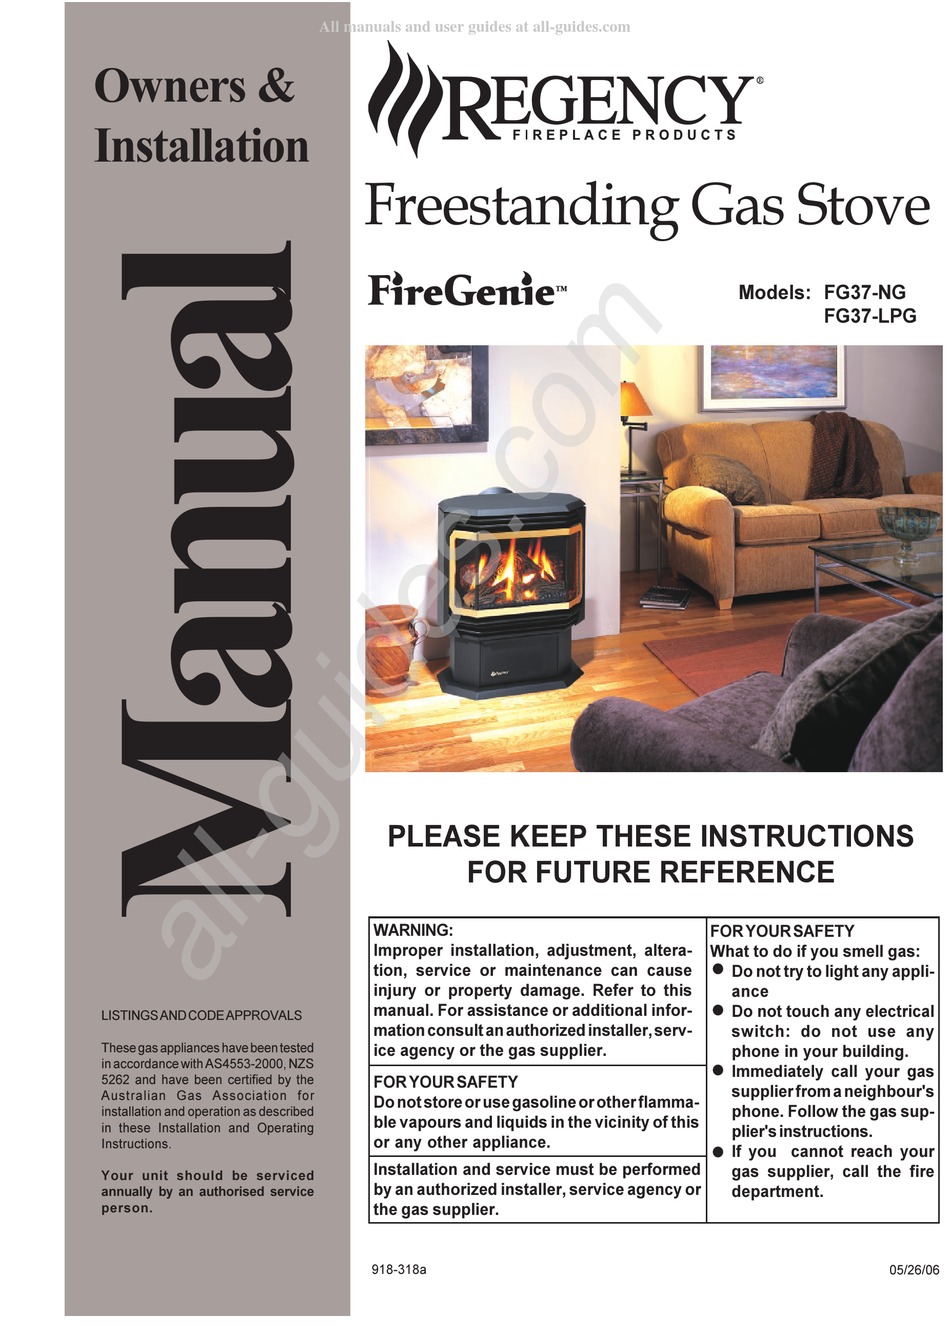 regency-fireplace-products-firegenie-fg37-ng-manual-pdf-download